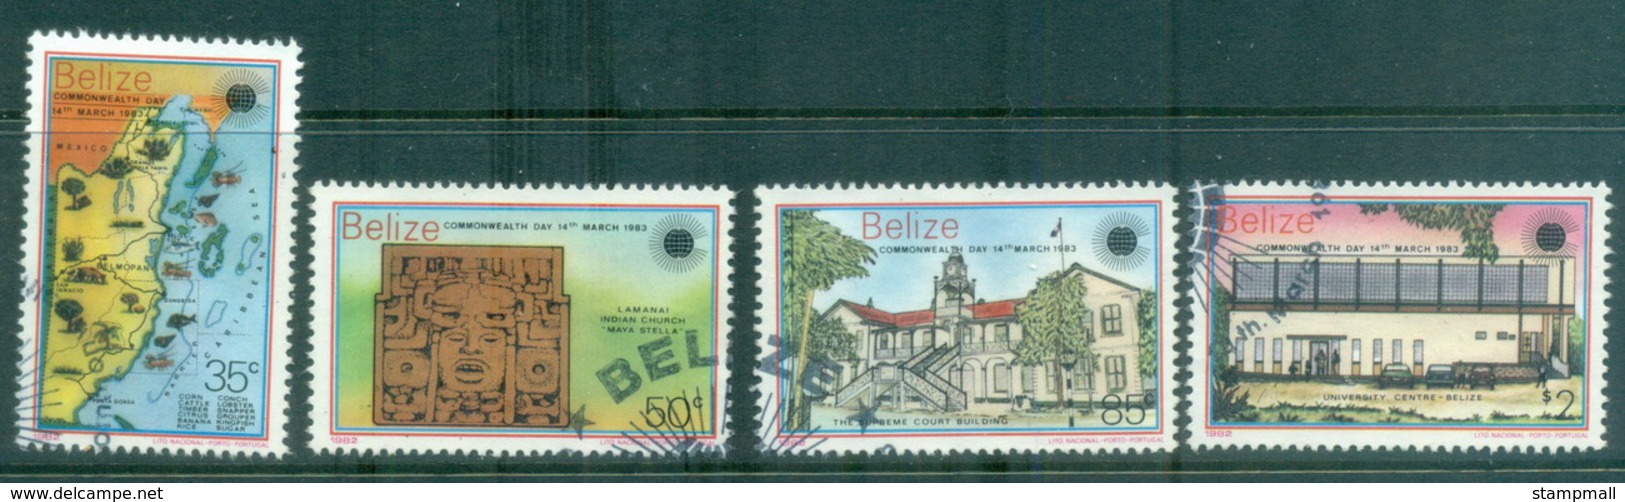 Belize 1983 Commonwealth Day FU - Belize (1973-...)